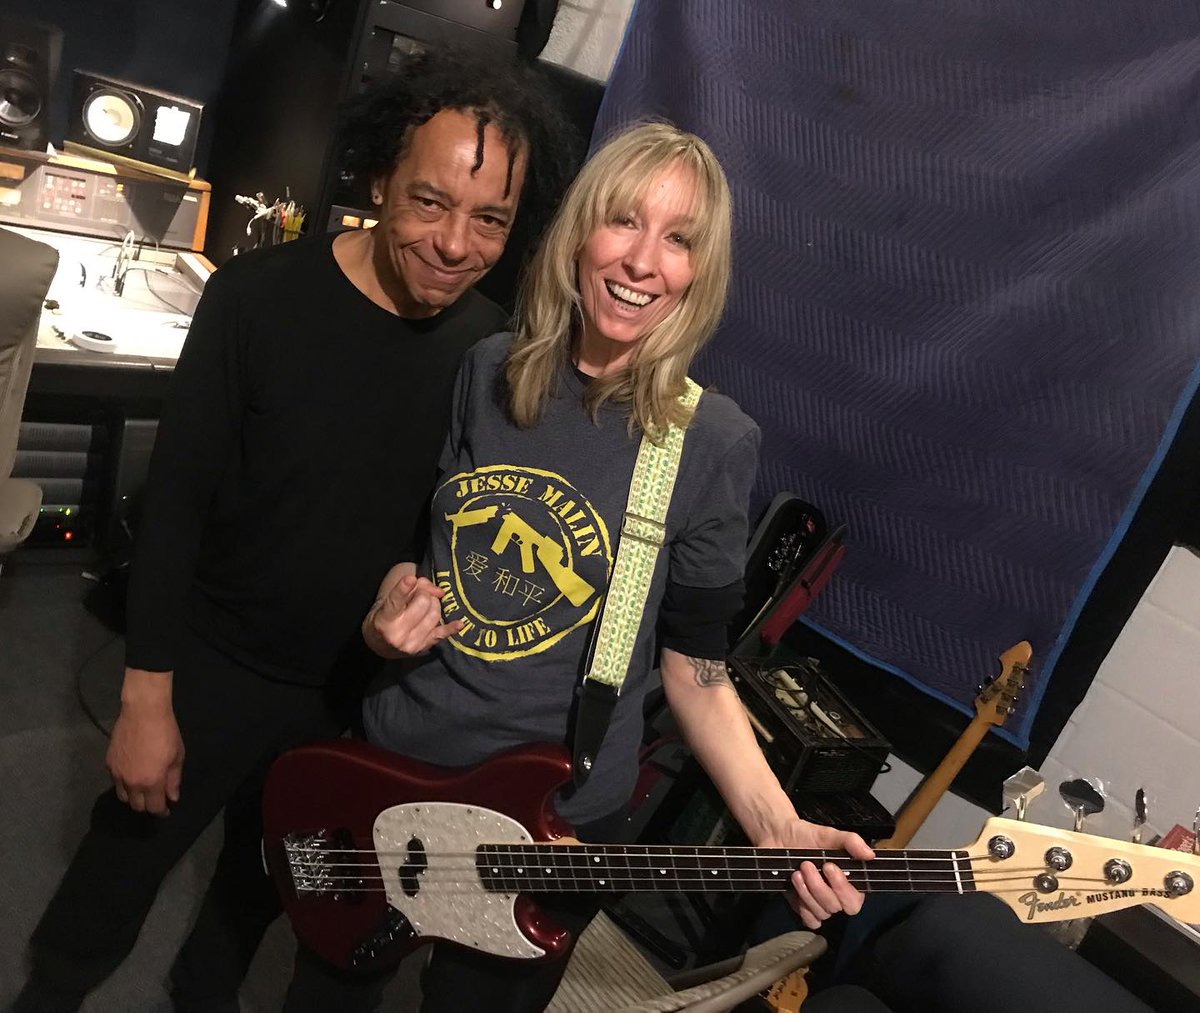 Big thanks to theee legendary OG punk Ivan Julian for giving me the opportunity to plug in and play my beautiful new Mustang in his super-cool studio! She sounds so good, slight ‘new string buzz’, I’ll have fun playing her in. Ivan’s still punkAF, some great new music coming! 💚